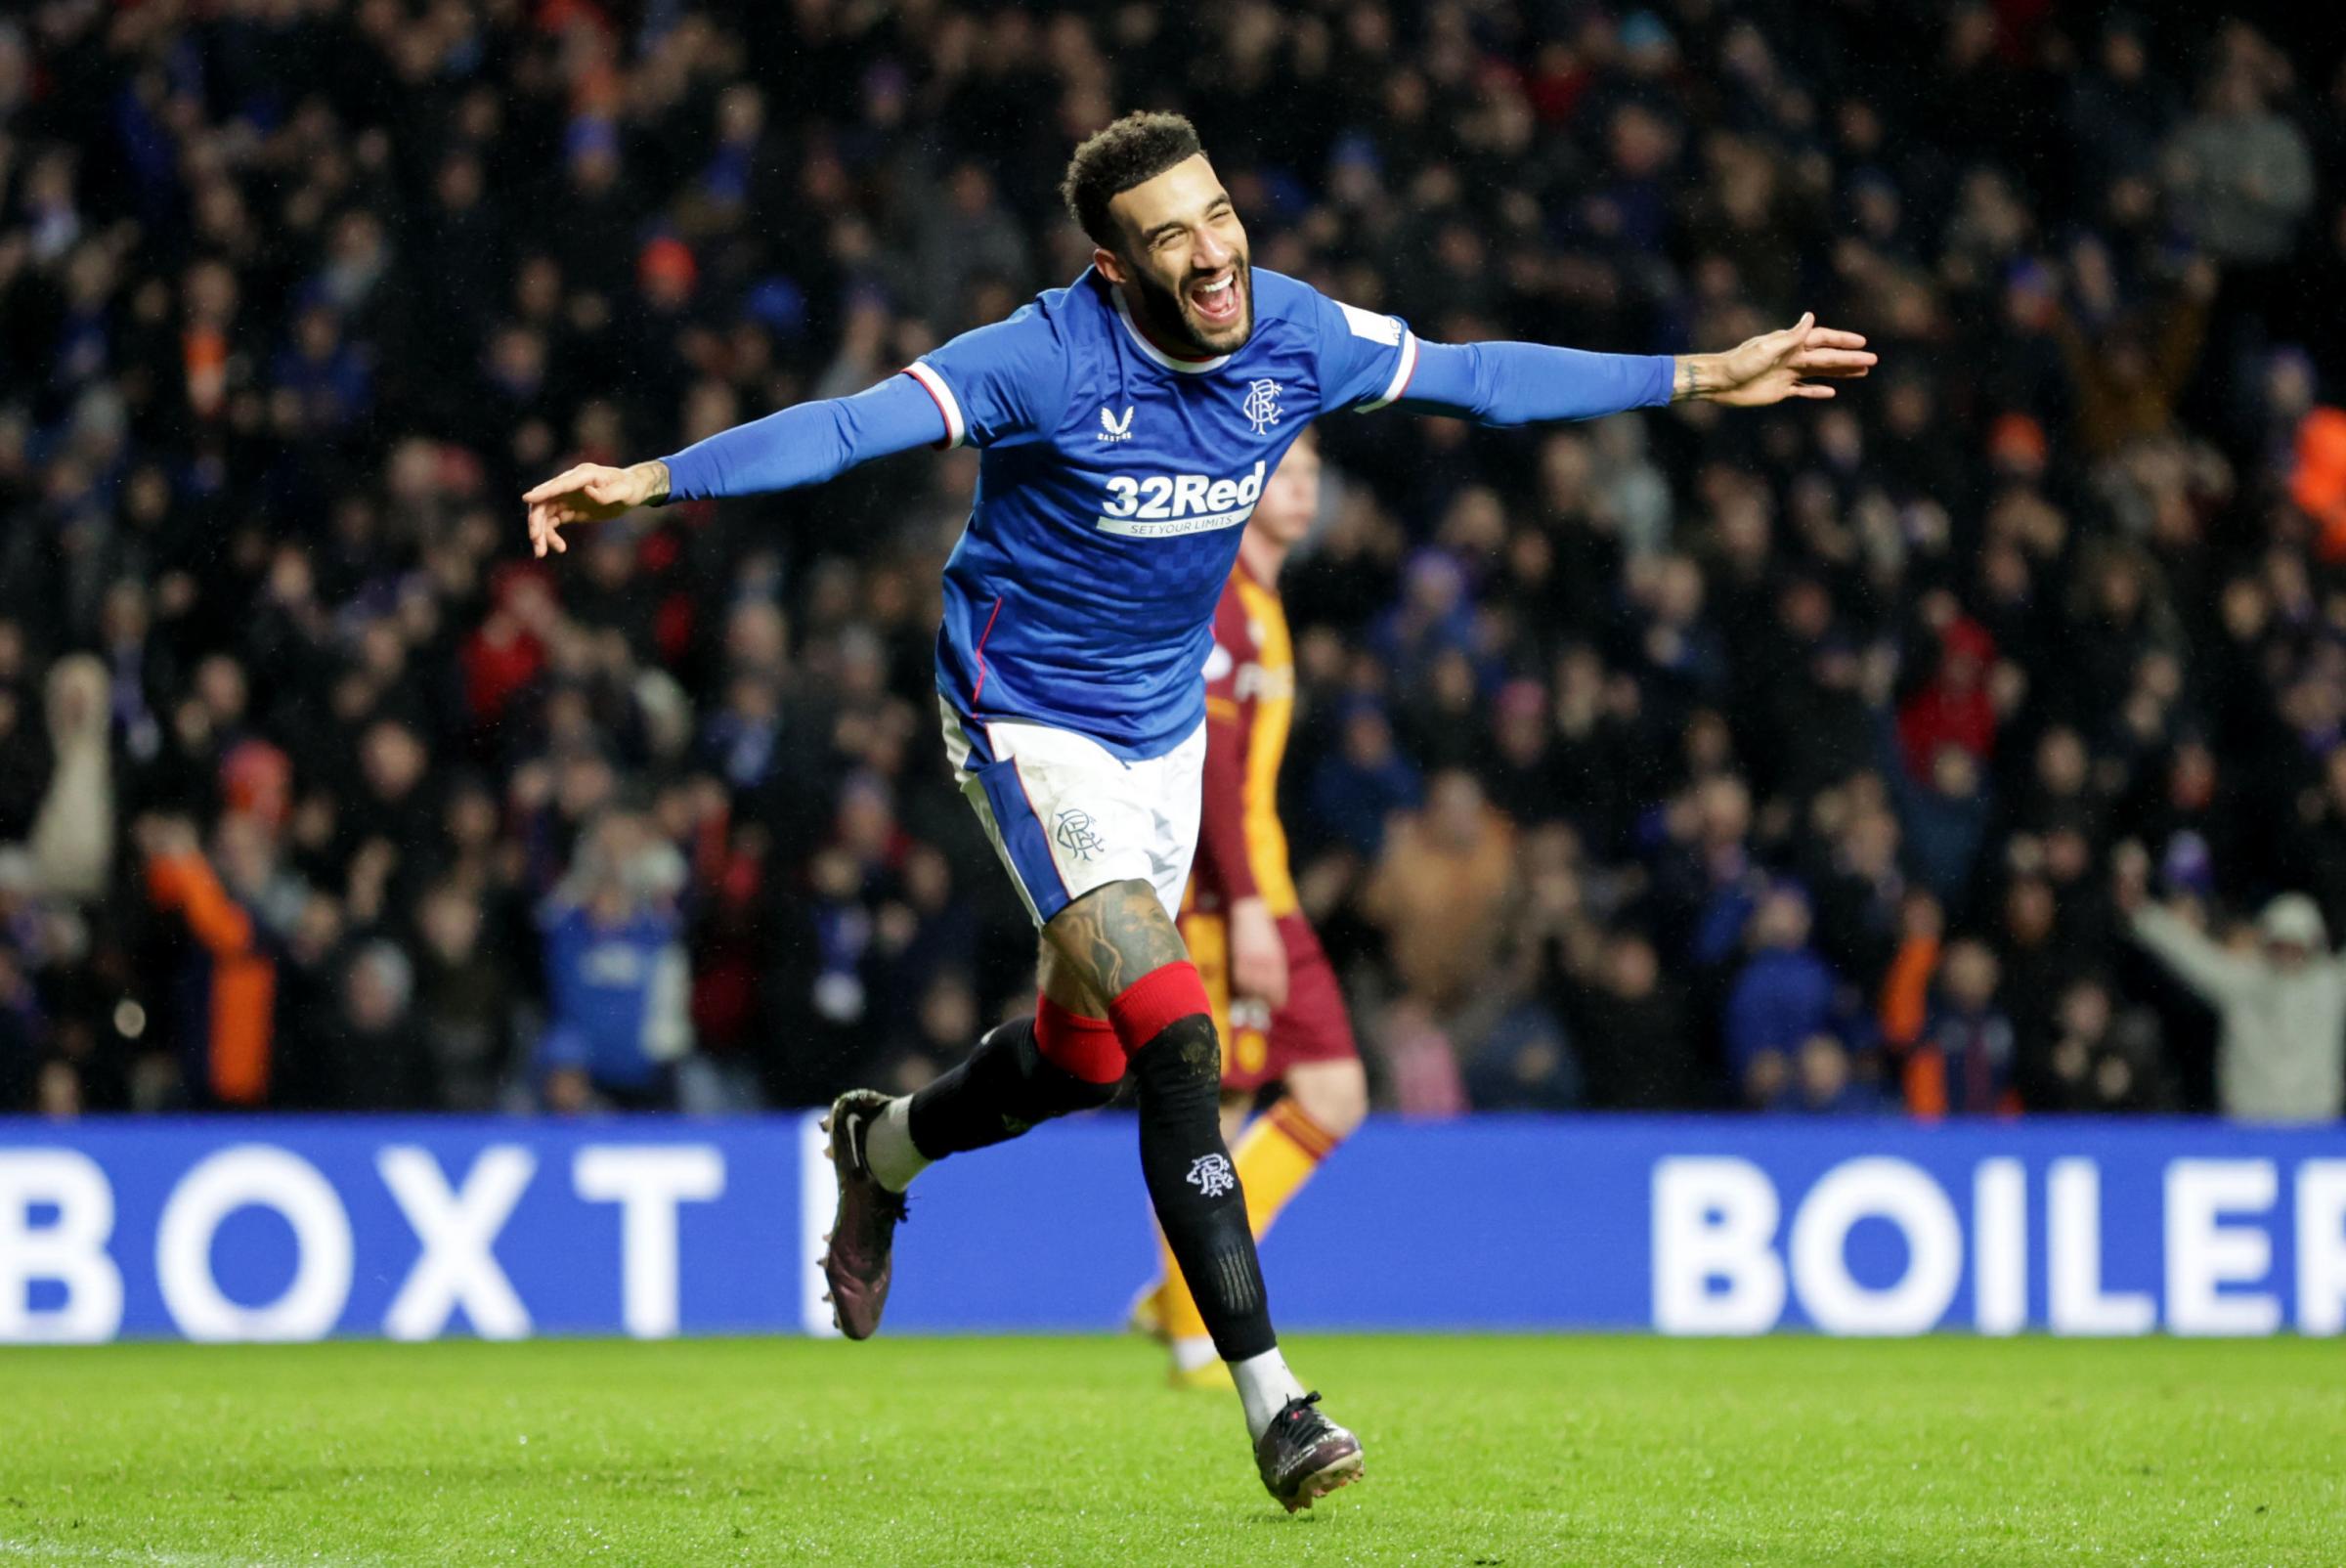 Connor Goldson on his Rangers deal and perception as he eyes Ibrox end